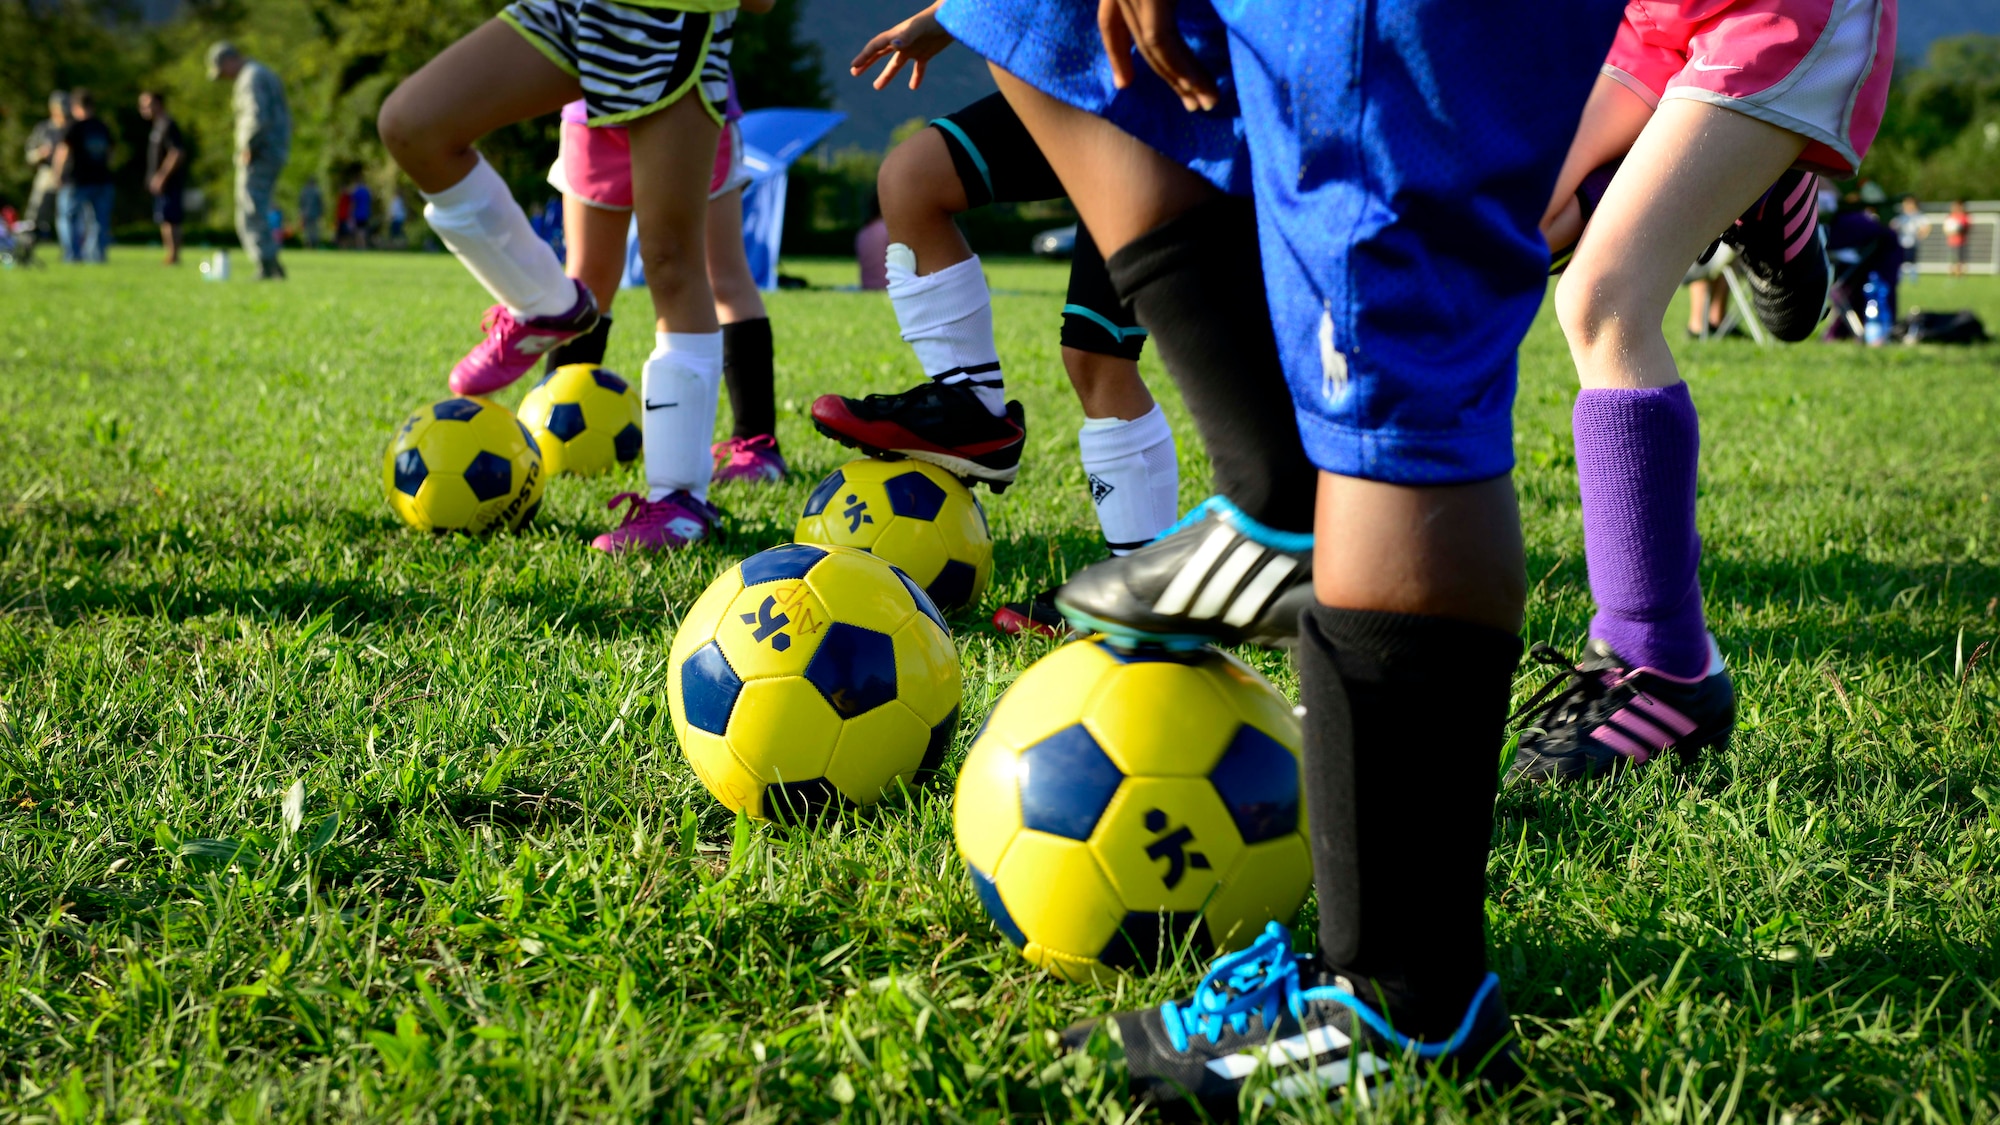 Team Aviano youth wait for instructions during soccer practice, Sept. 8, 2015, at Aviano Air Base, Italy. The Aviano Youth Program hosts soccer practice for different age groups twice a week. The soccer season, which ends Oct. 31, is the largest AYP program with more than 300 participants. (U.S. Air Force photo by Senior Airman Areca T. Bell/Released)